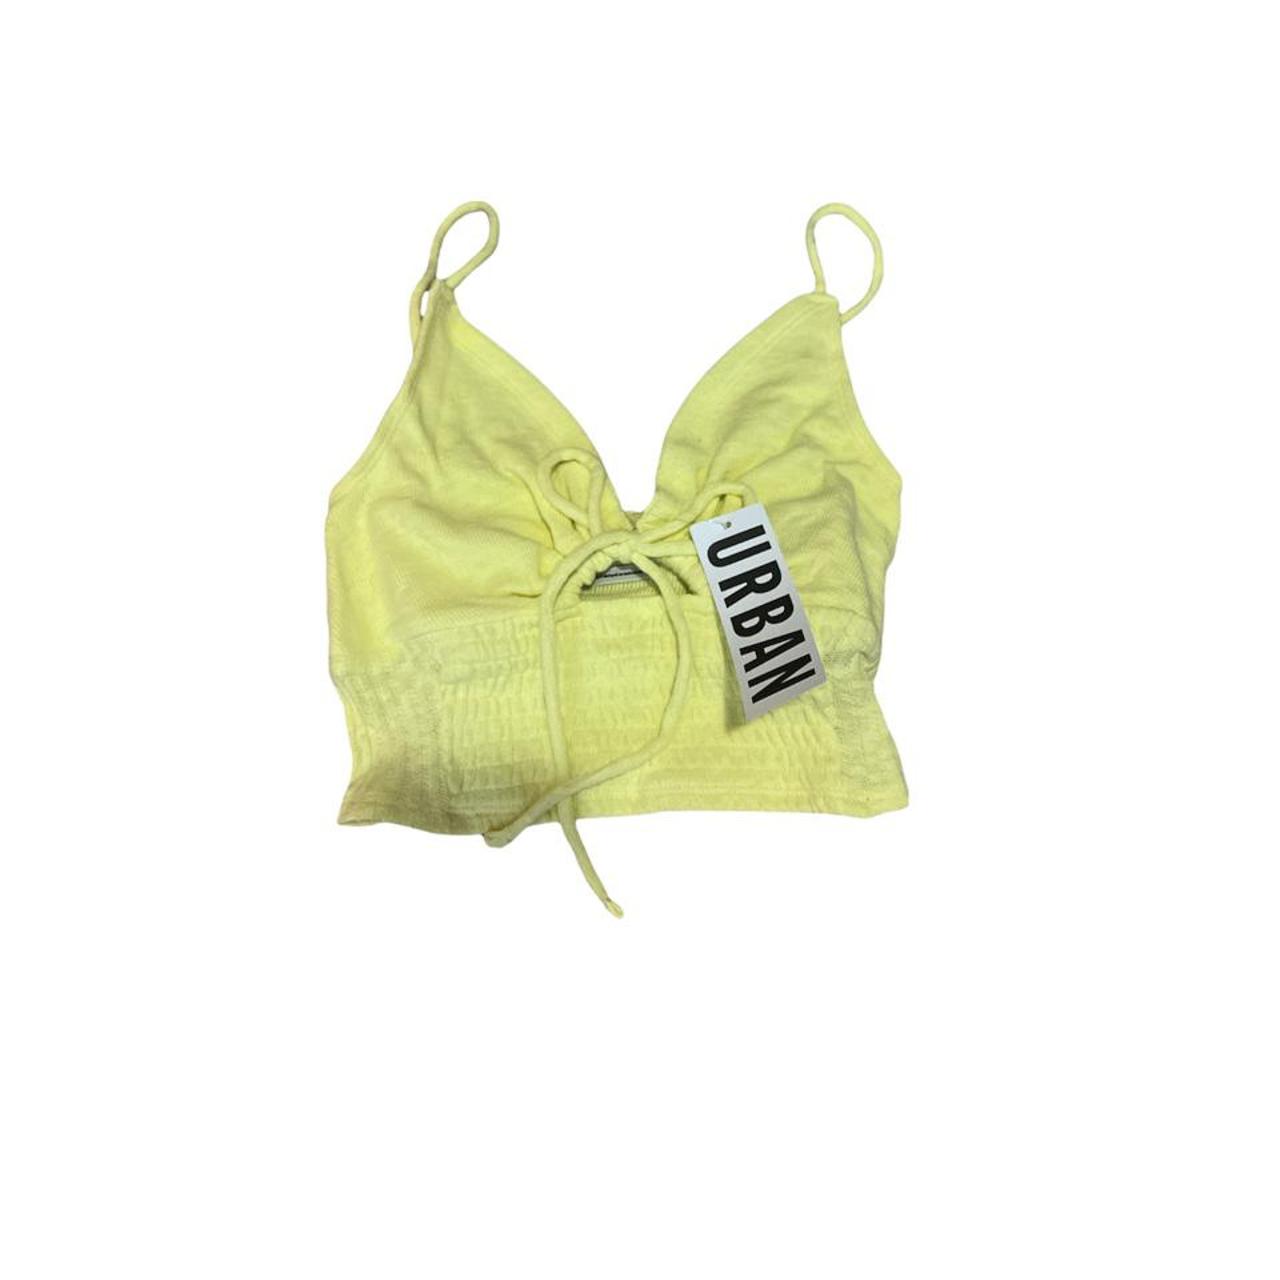 Product Image 2 - Urban outfitters yellow keyhole smocked